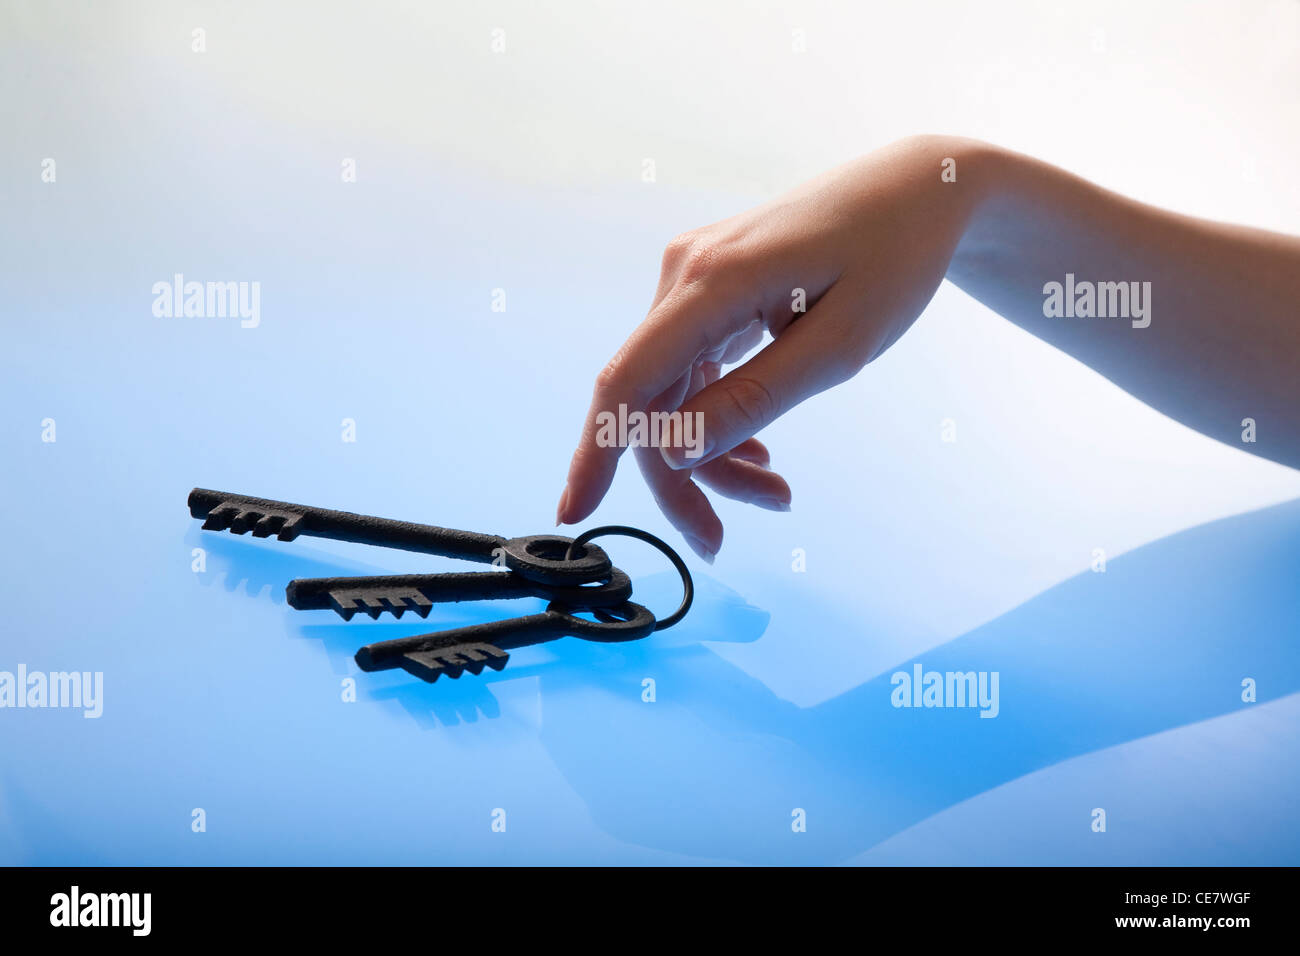 Woman's hand gently touching a bunch of retro keys Stock Photo